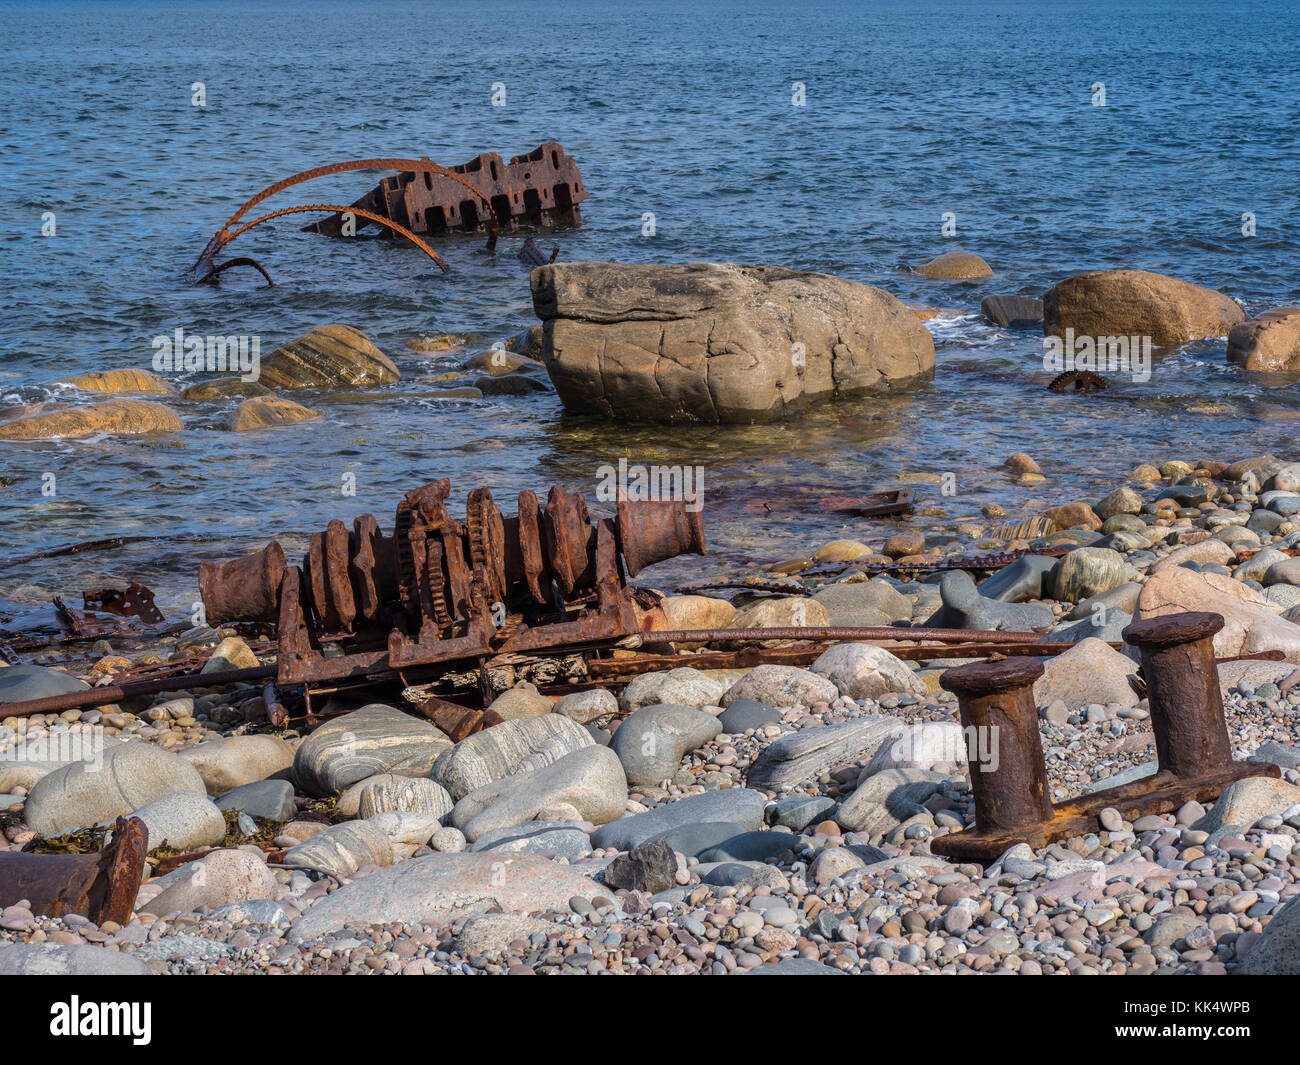 S.S. Ethie shipwreck site, Highway 430, the Viking Trail, Gros Morne National Park, Newfoundland, Canada. Stock Photo